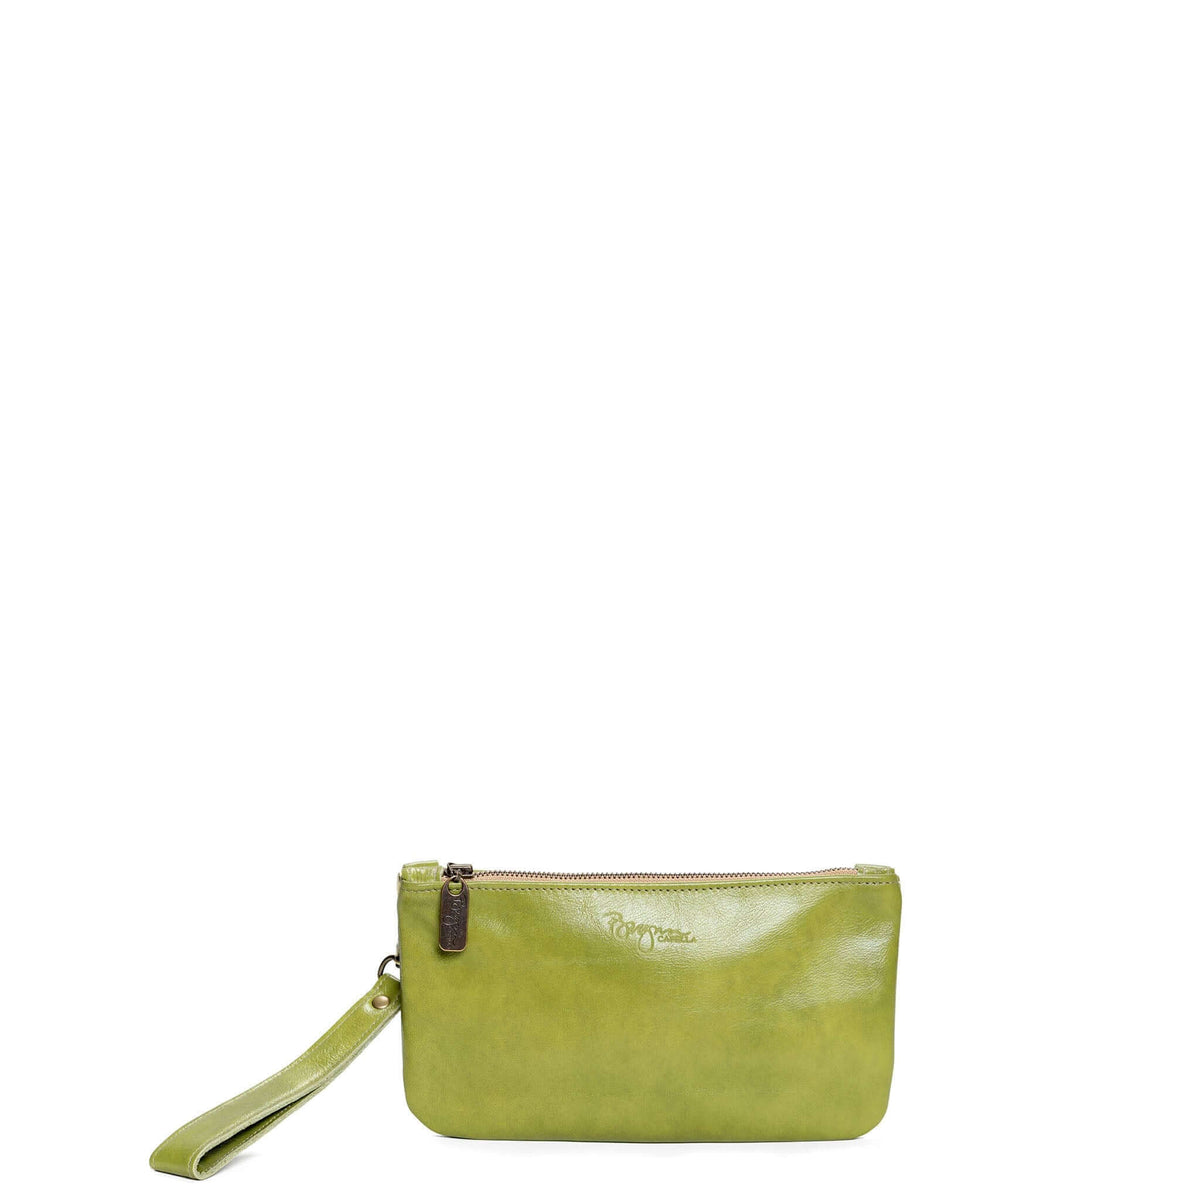 Cher Mini Crossbody in lime green, clutch, wallet, Brynn Capella, made in the USA